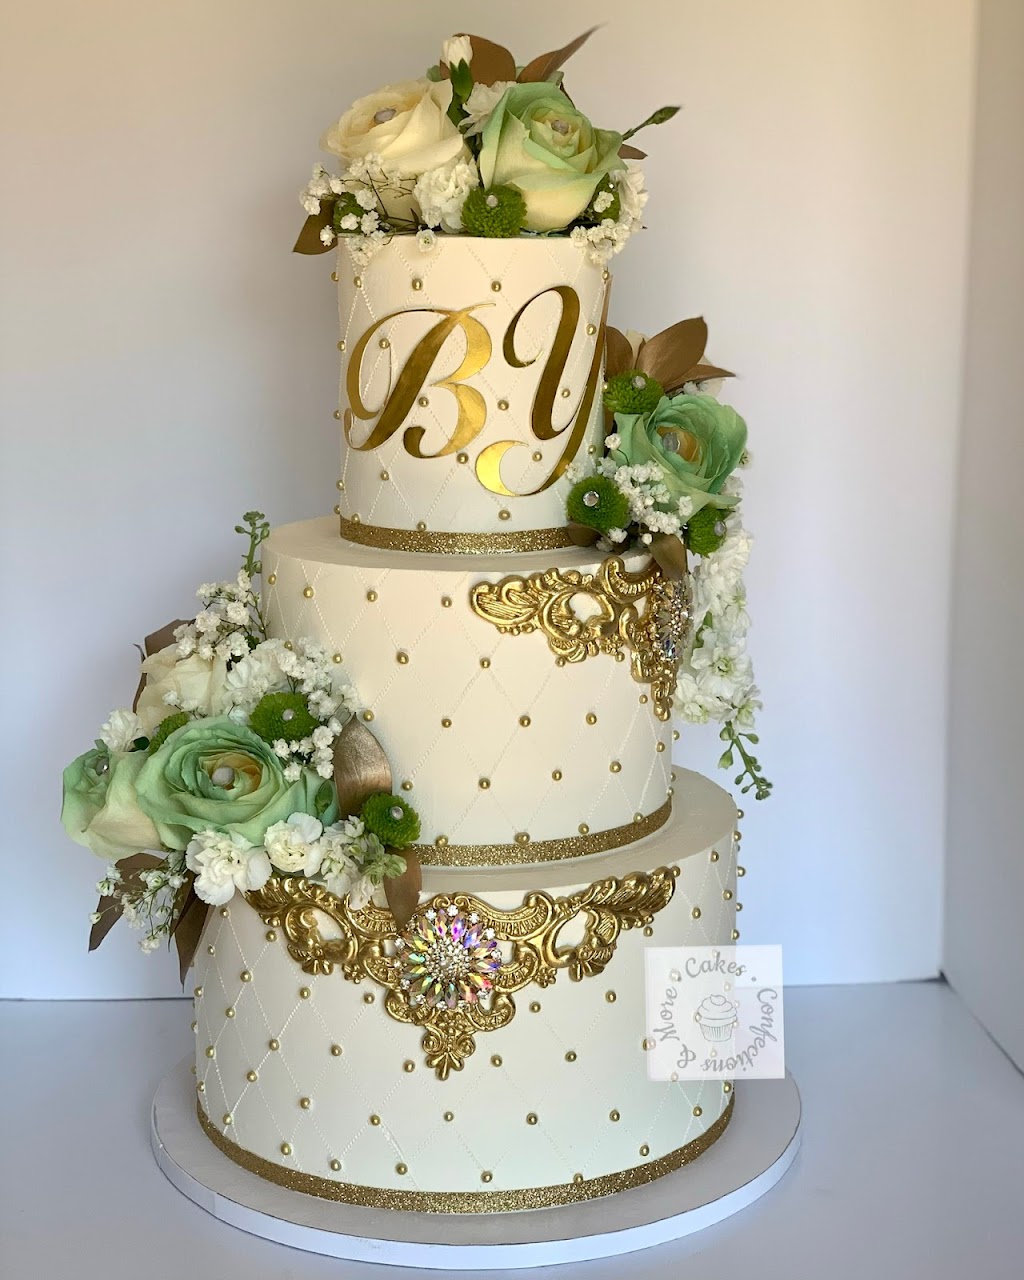 Cakes, Confections & More | 167 Rathbun Ave, Staten Island, NY 10312 | Phone: (718) 304-6295